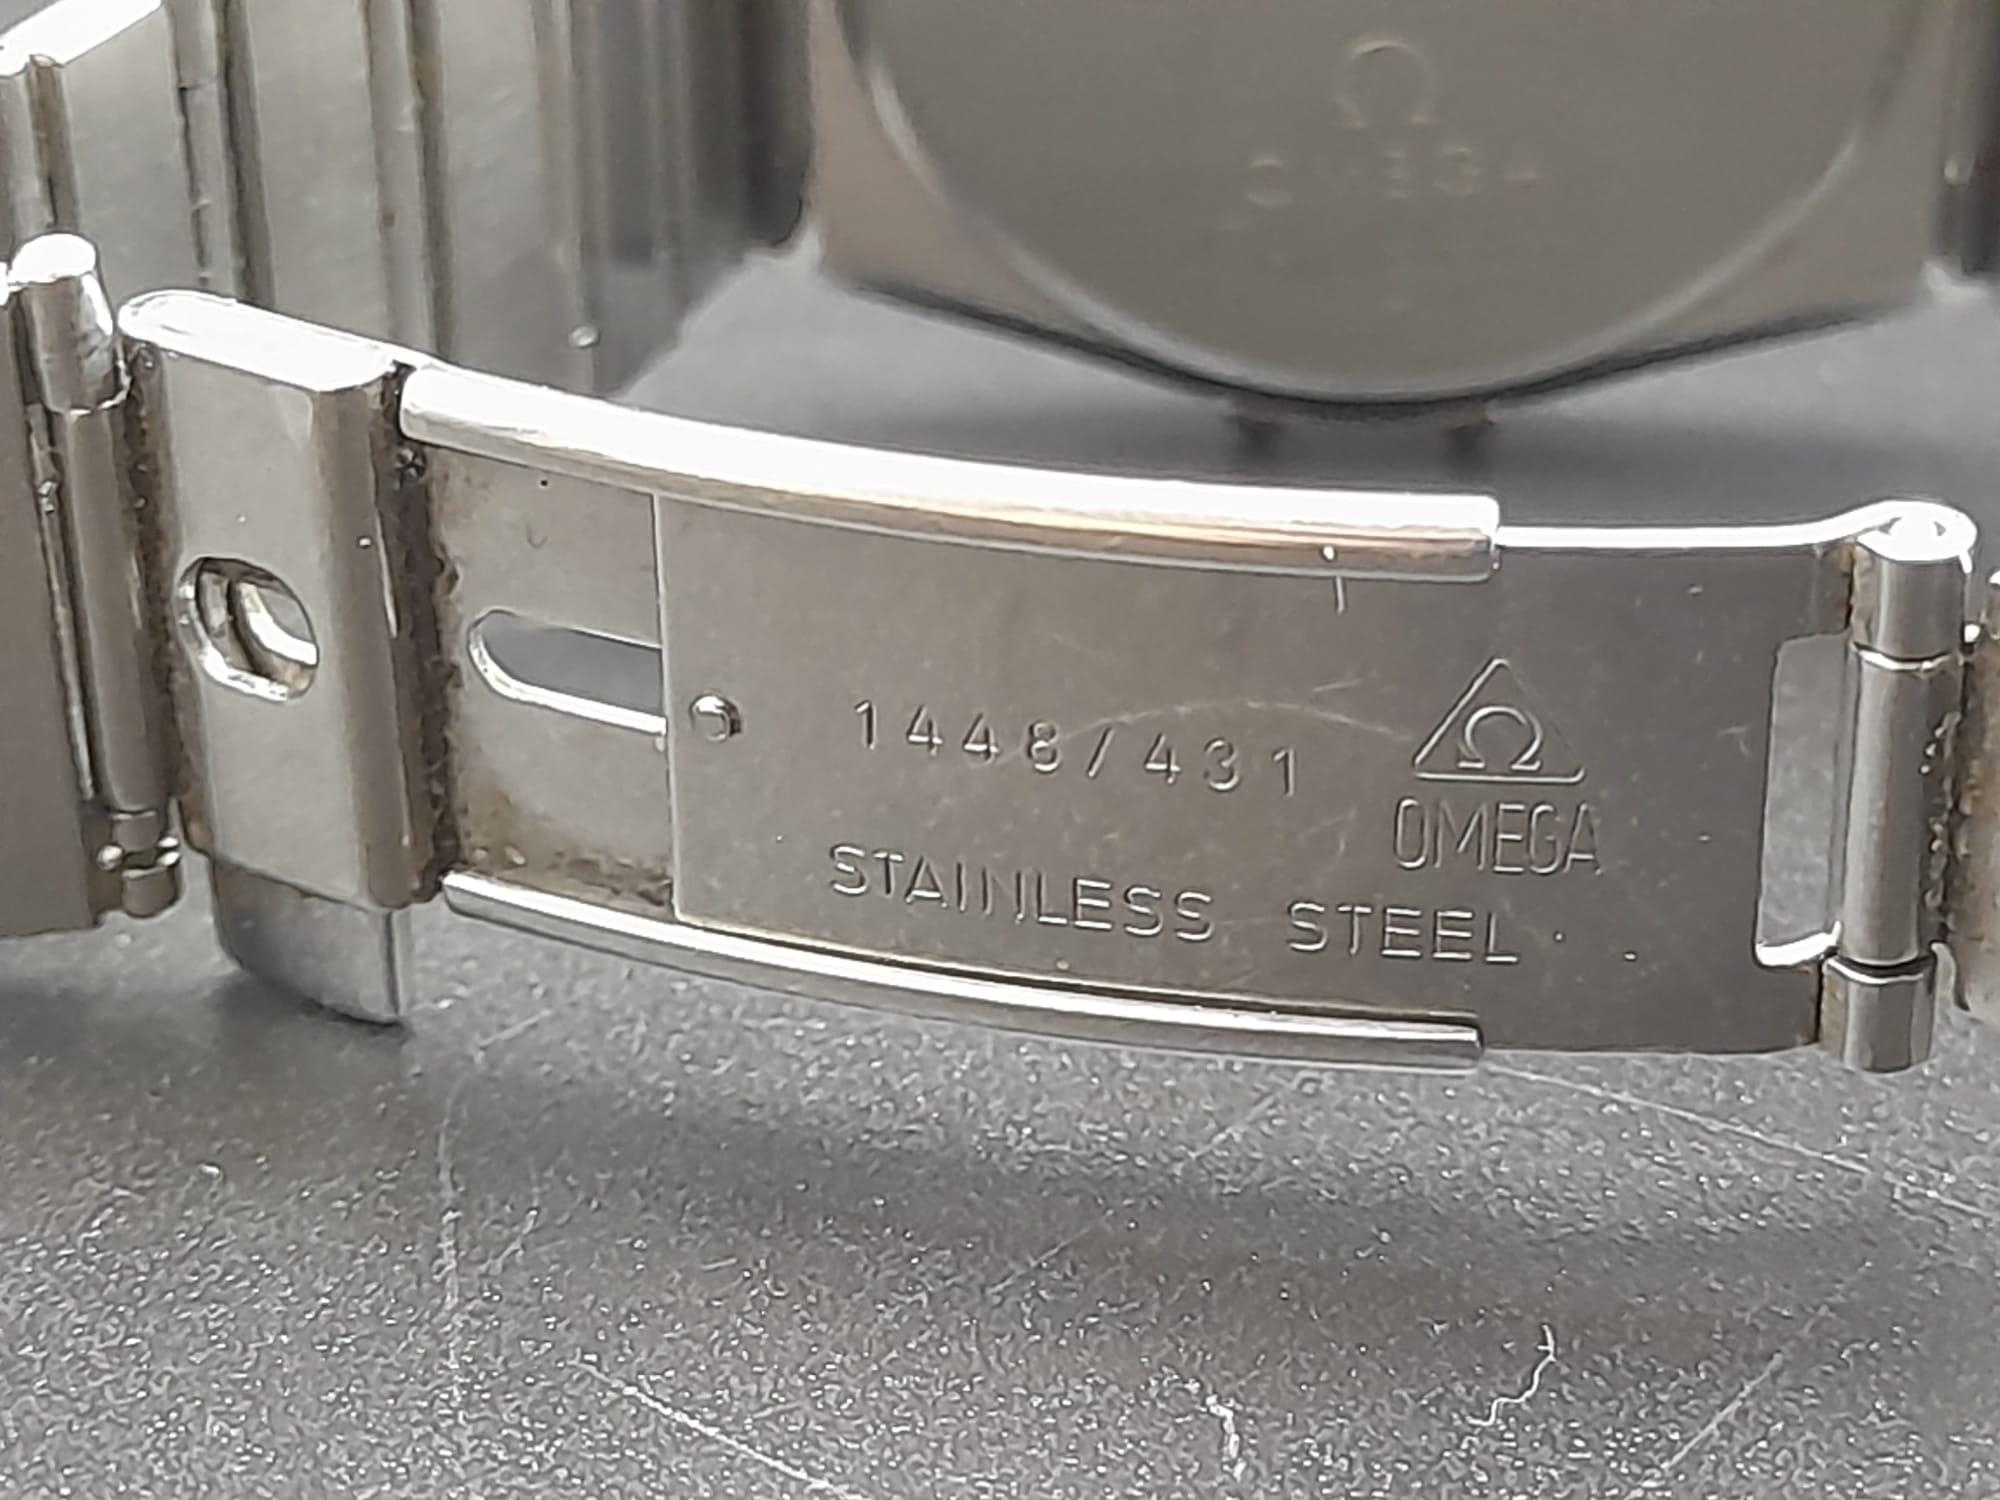 OMEGA CONSTELATION QUARTZ BRACELET WATCH WITH ORIGINAL BOX AND PAPERS. 32mm. Needs batteries. - Image 9 of 13